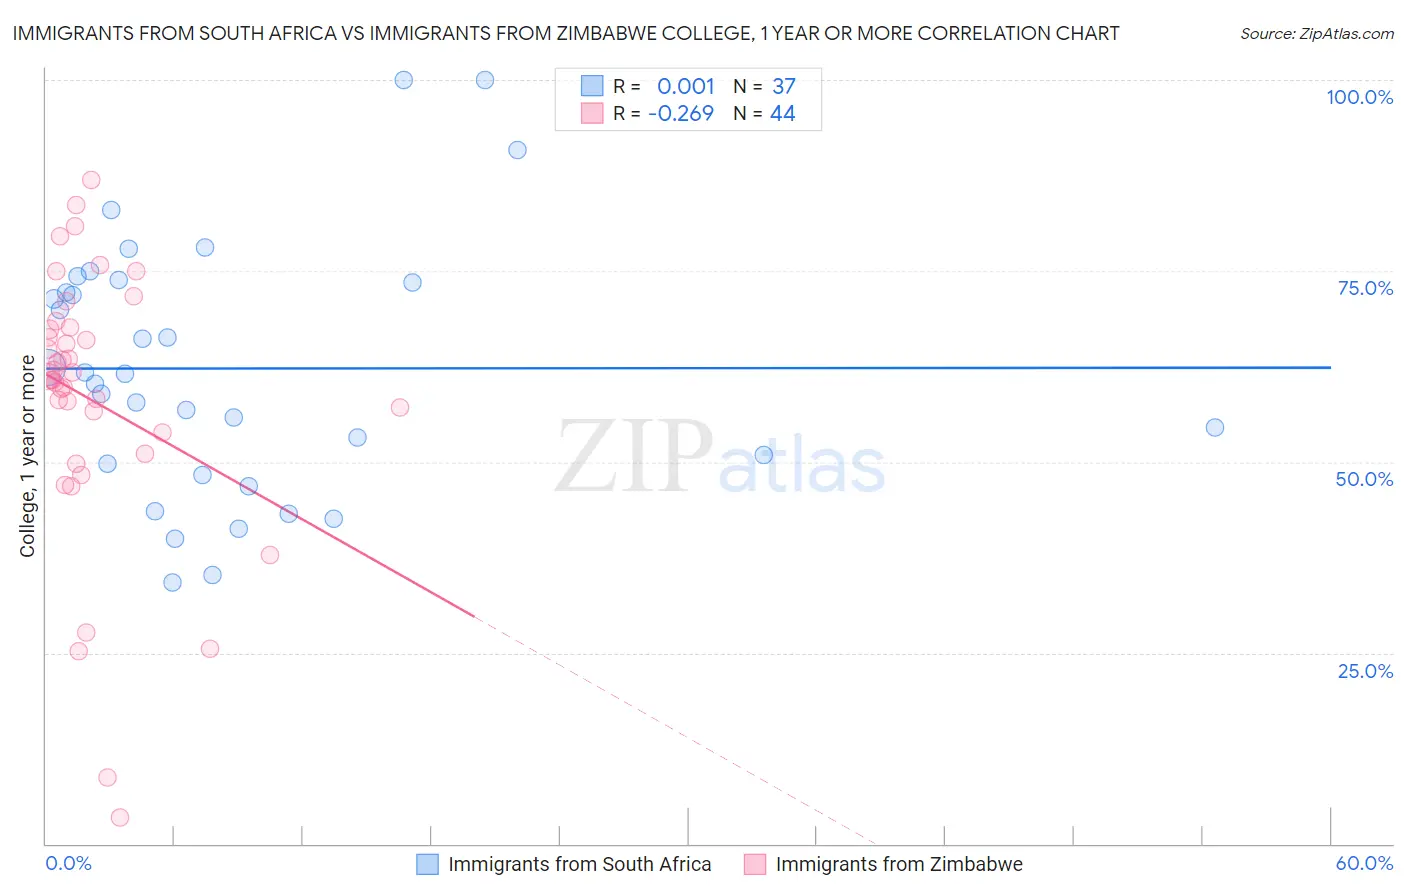 Immigrants from South Africa vs Immigrants from Zimbabwe College, 1 year or more